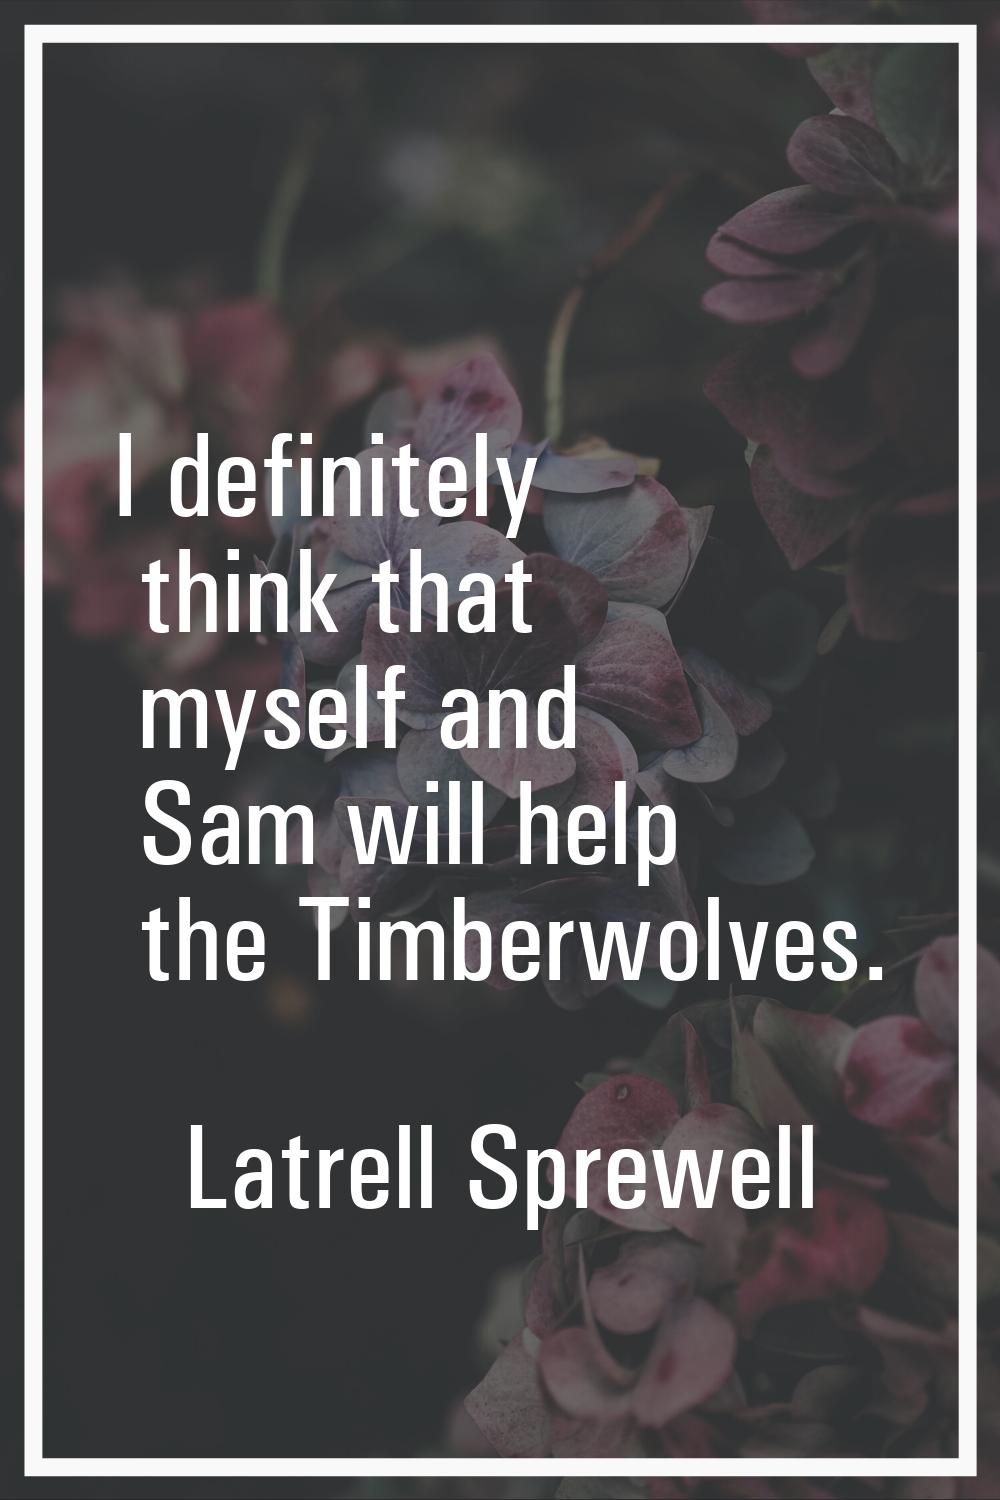 I definitely think that myself and Sam will help the Timberwolves.